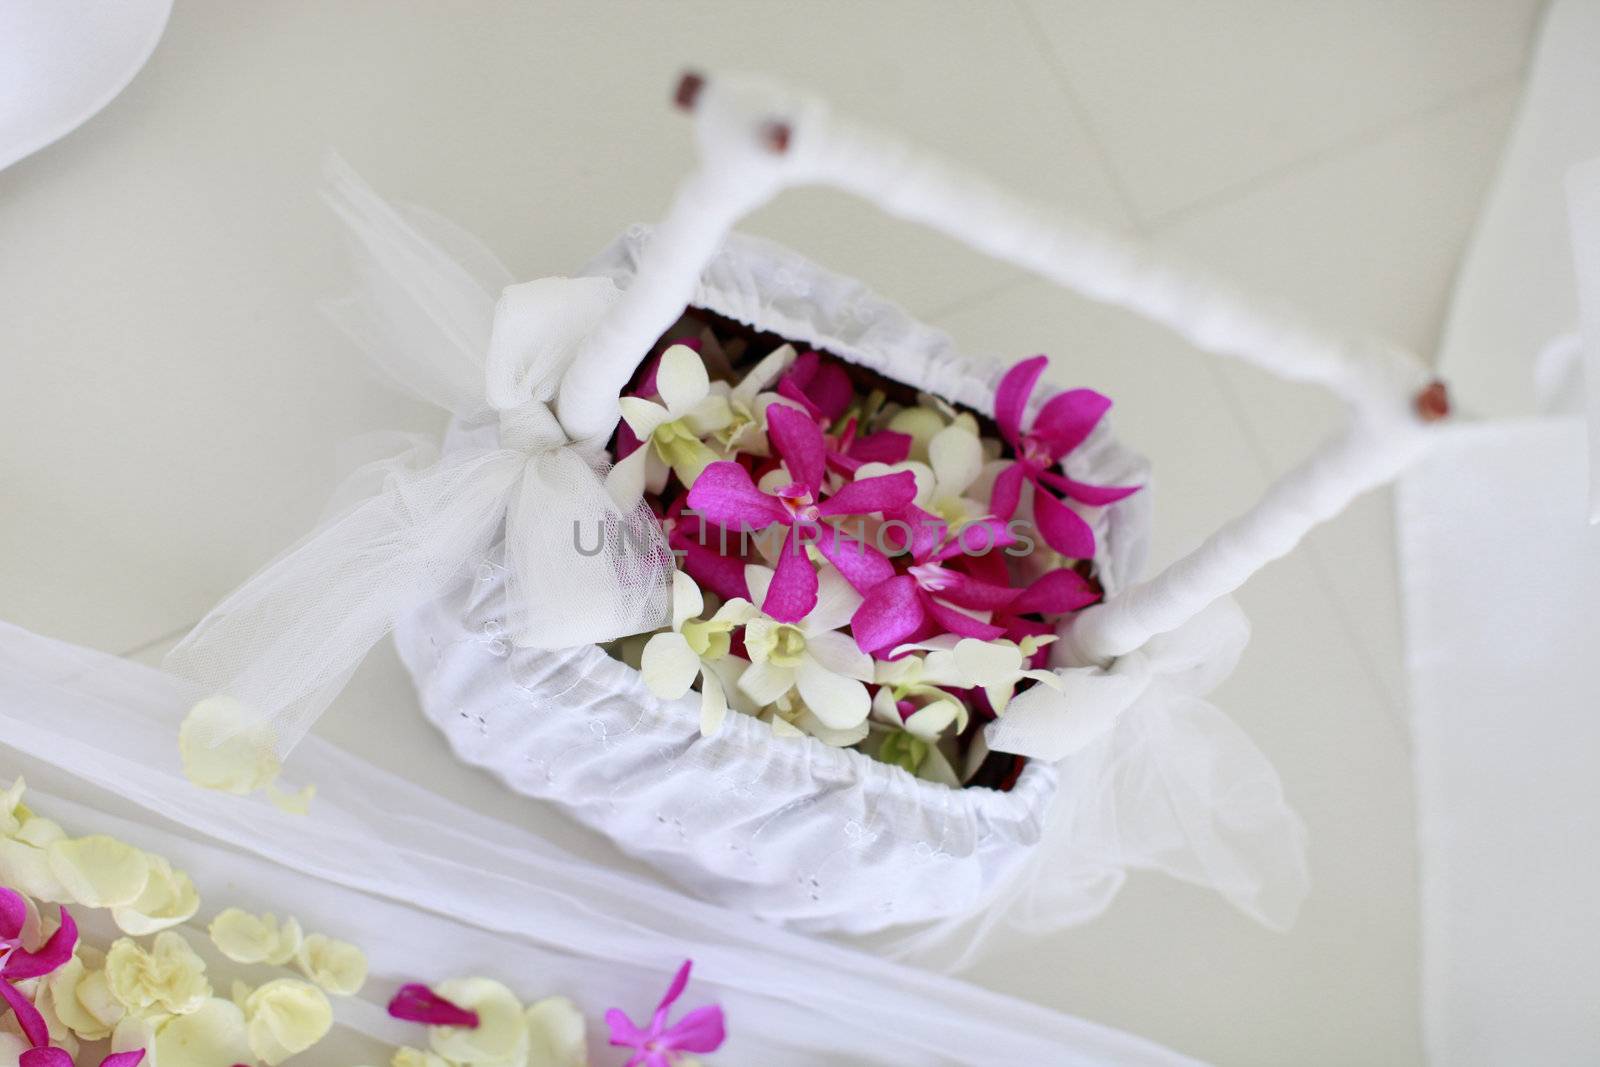 Basket of flowers at a wedding ceremony.